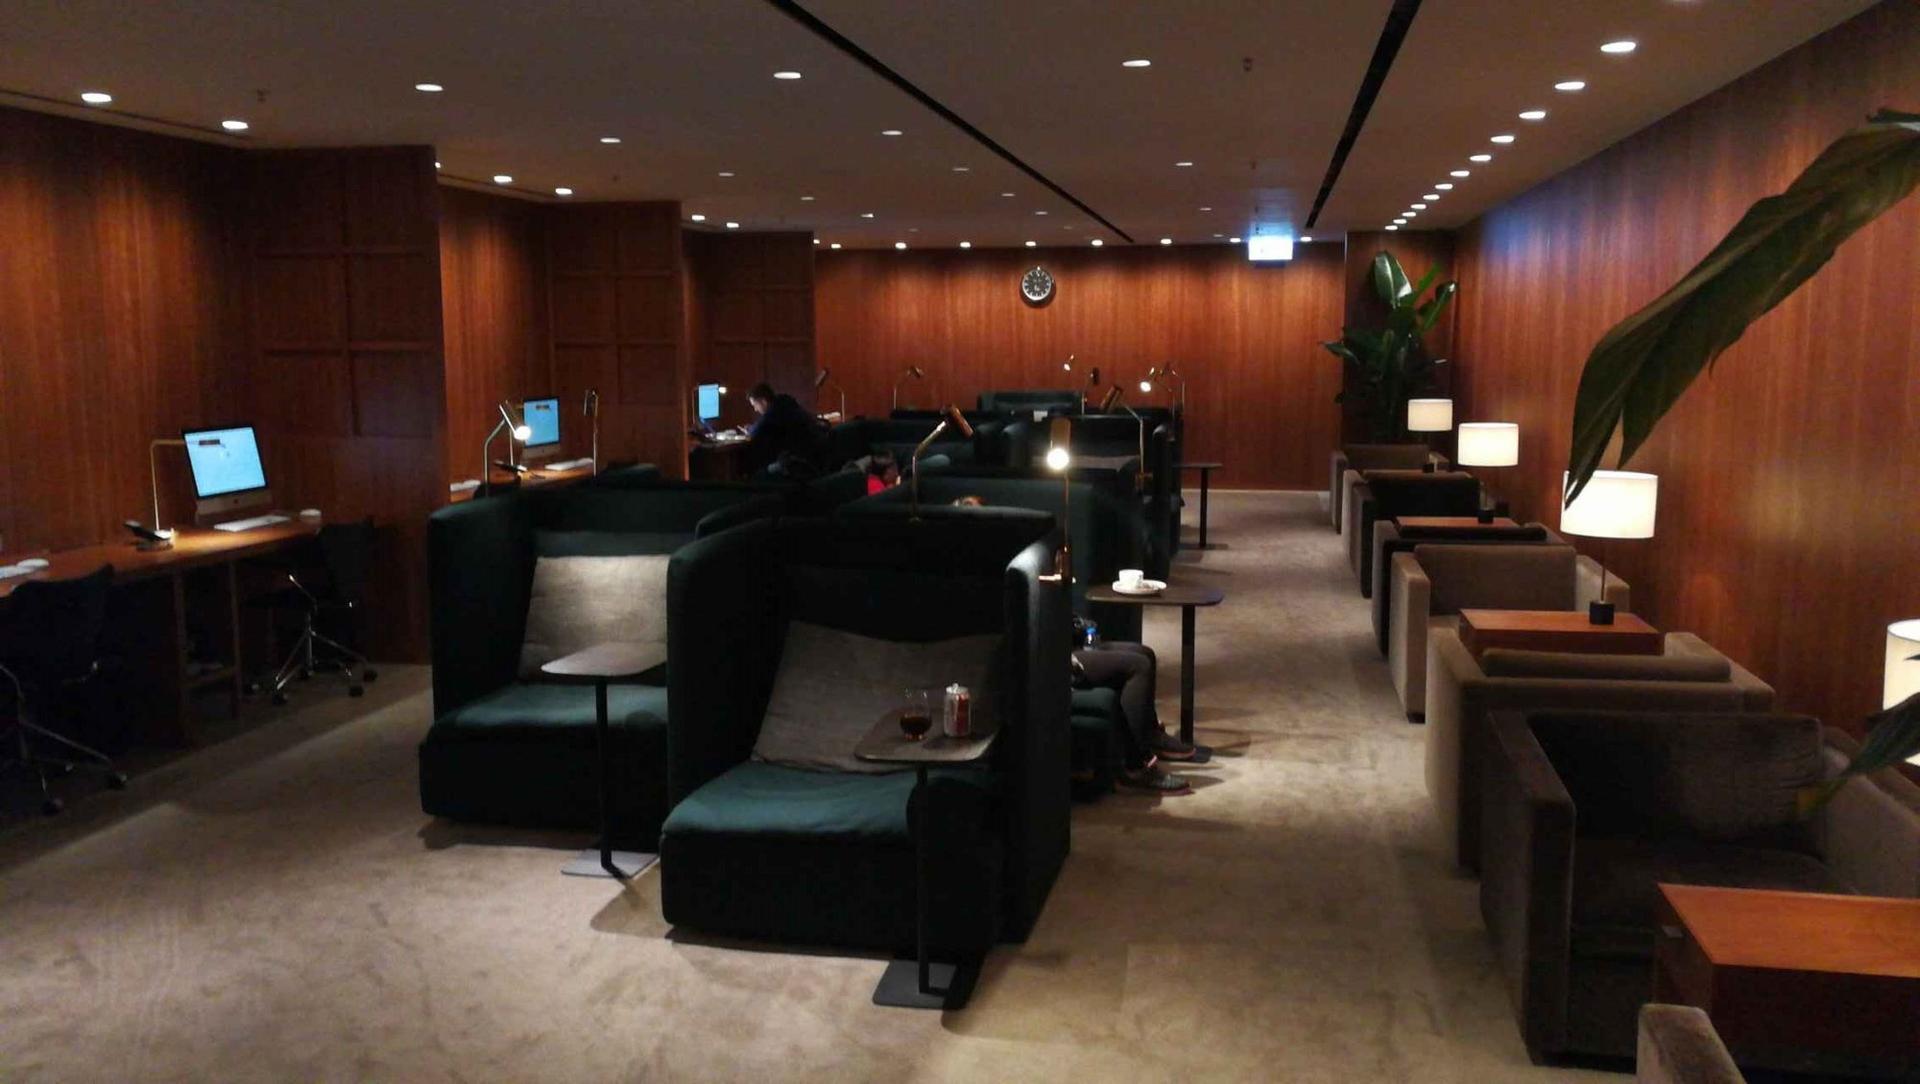 Cathay Pacific The Pier Business Class Lounge image 43 of 61